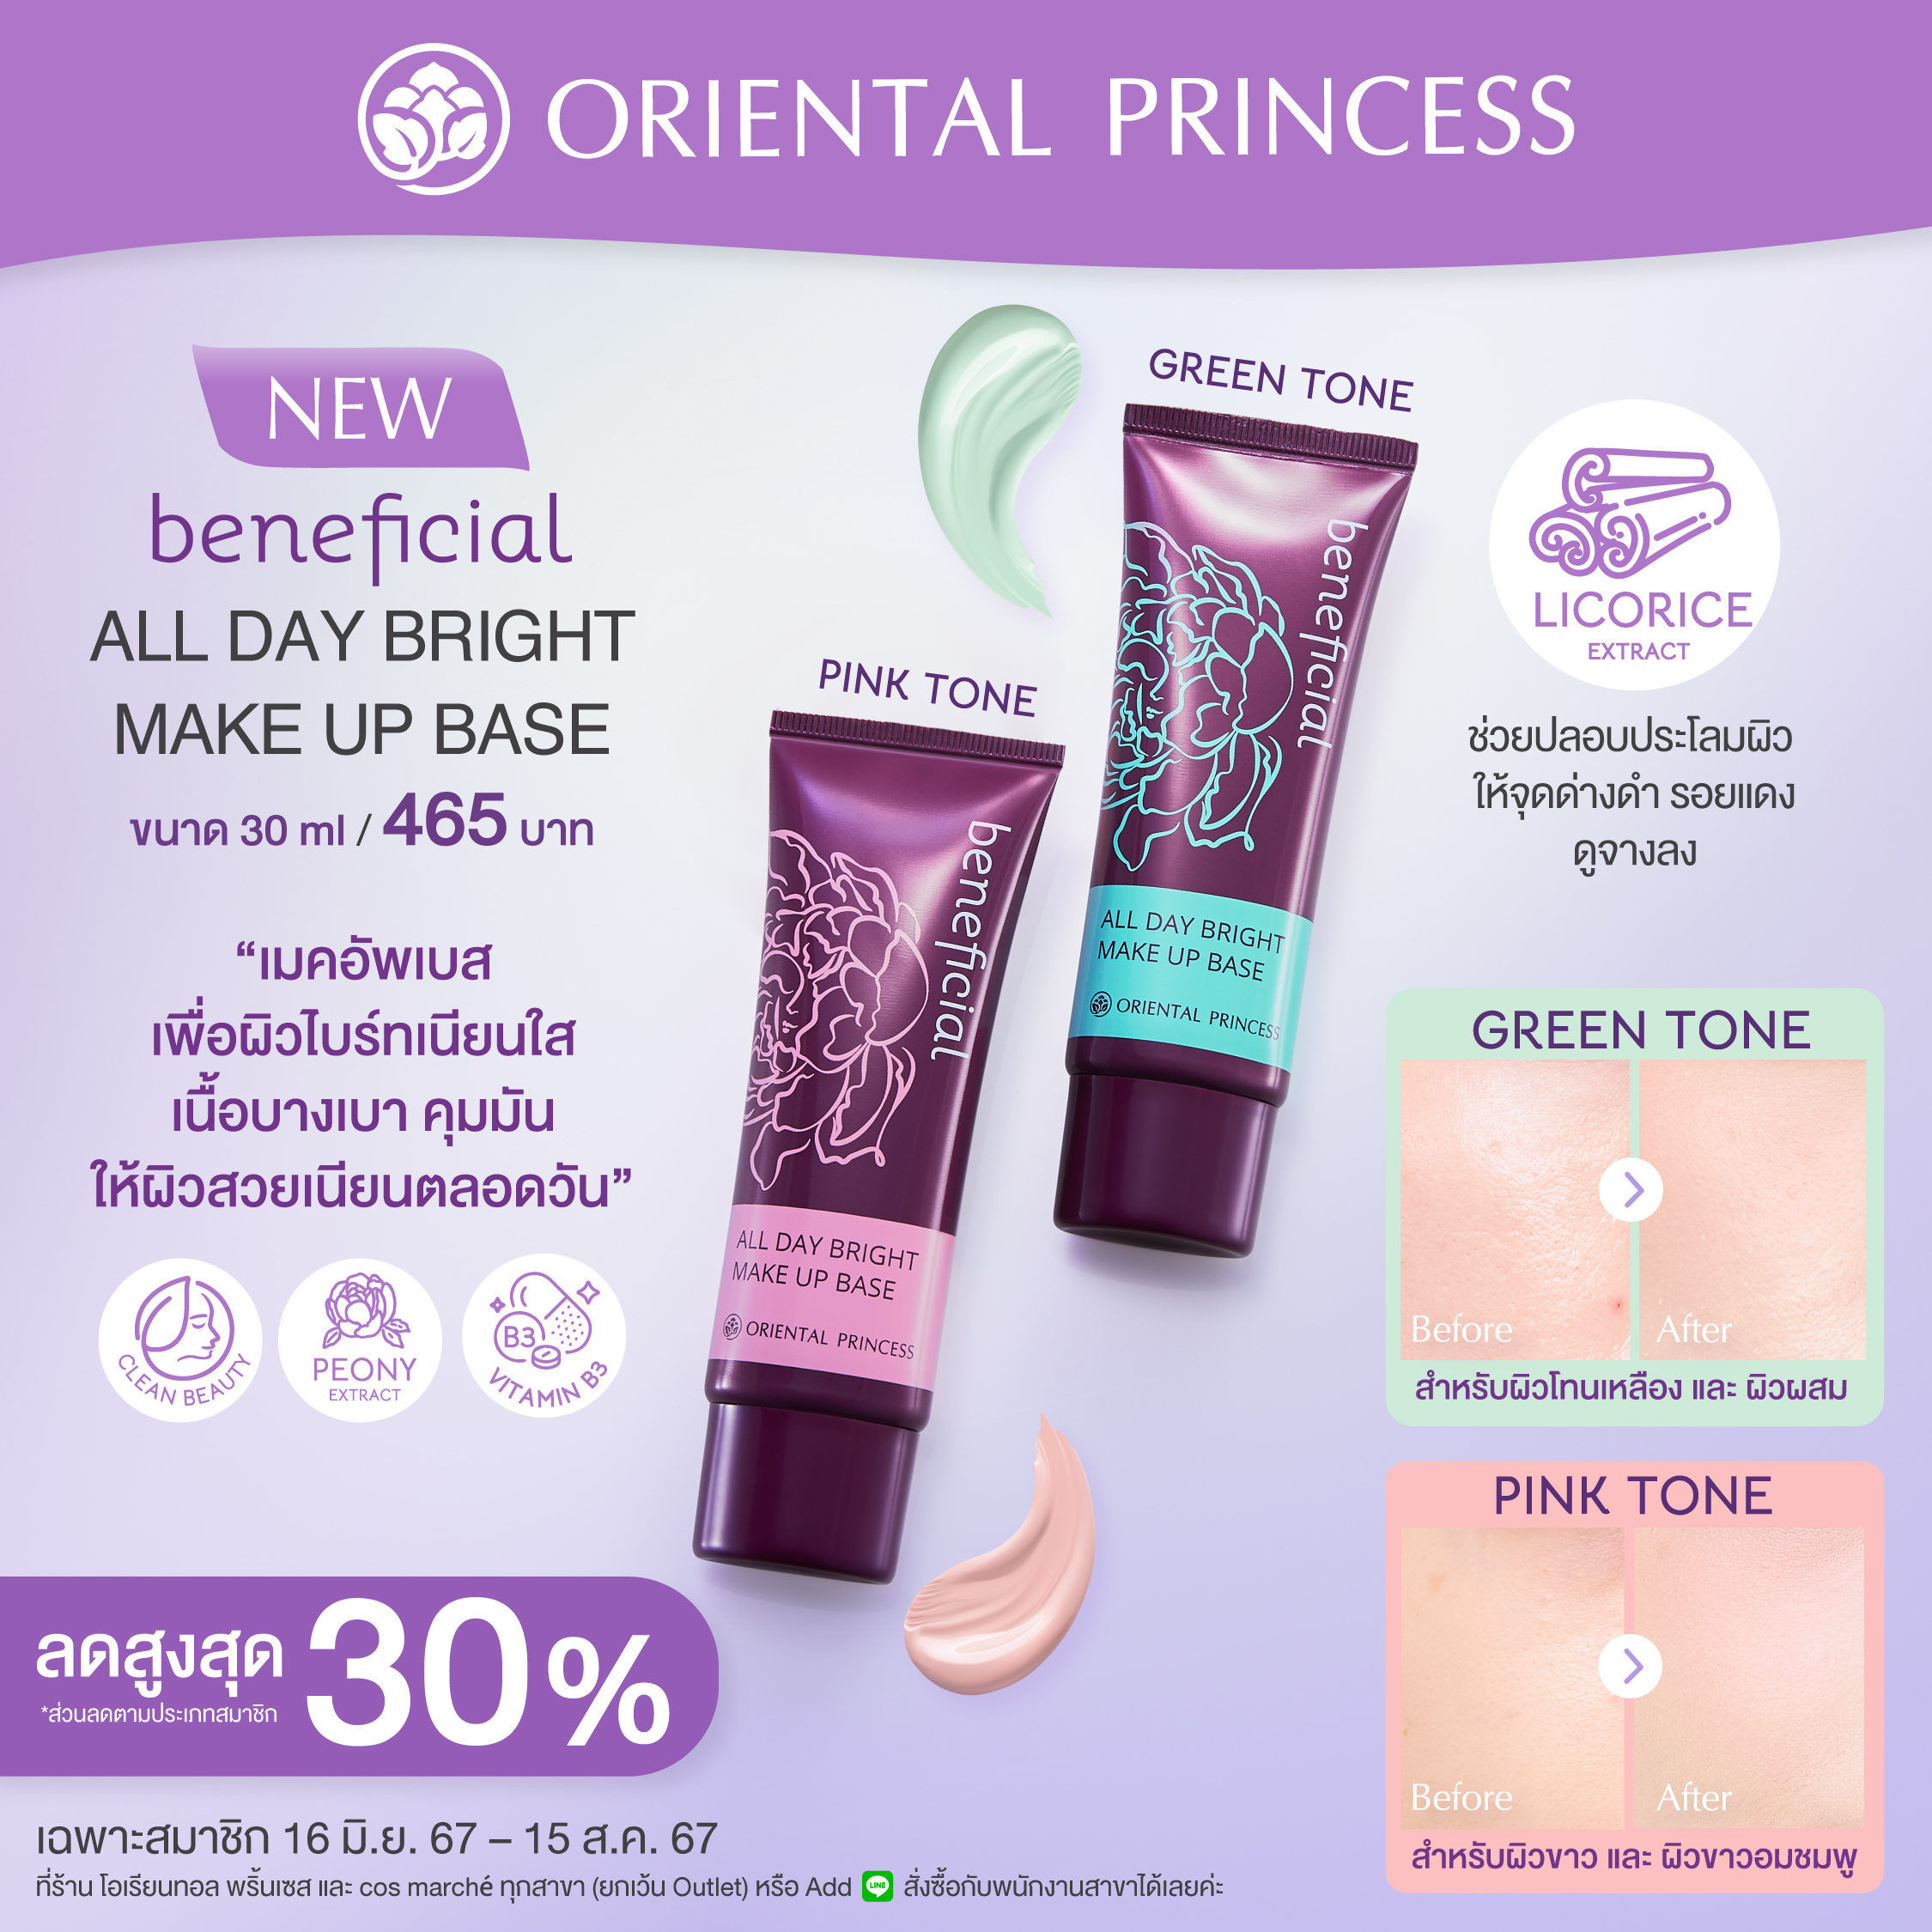 NEW! beneficial All Day Bright Make Up Base